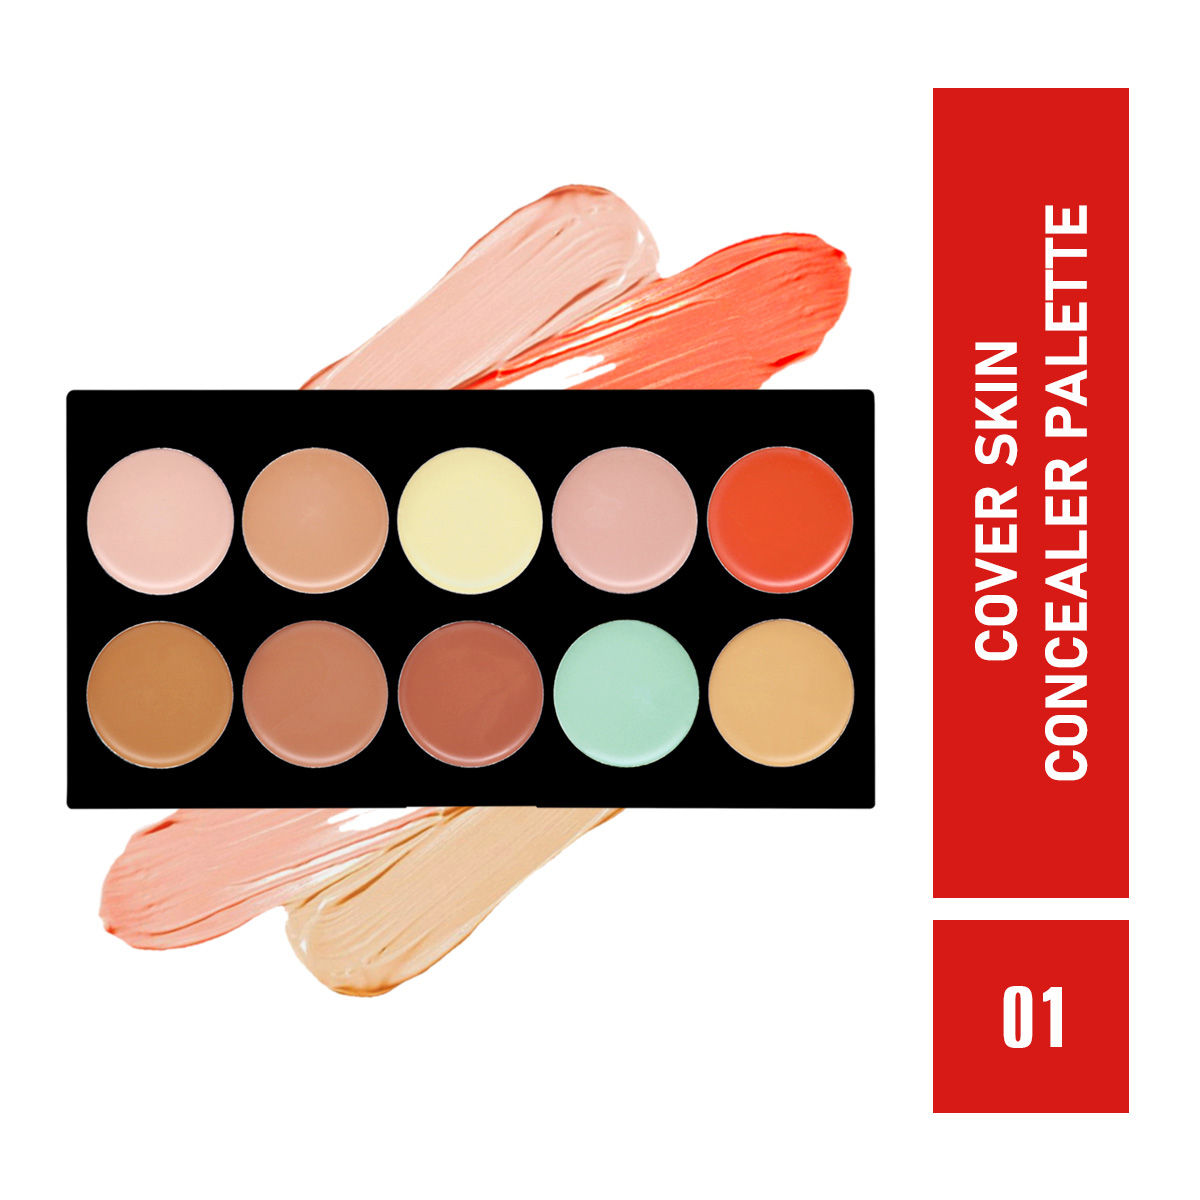 Buy Mattlook Cover Skin Concealer Palette Full Coverage Colour Correcting Lightweight Long-lasting Waterproof Creamy Formula - 01 (18g) - Purplle